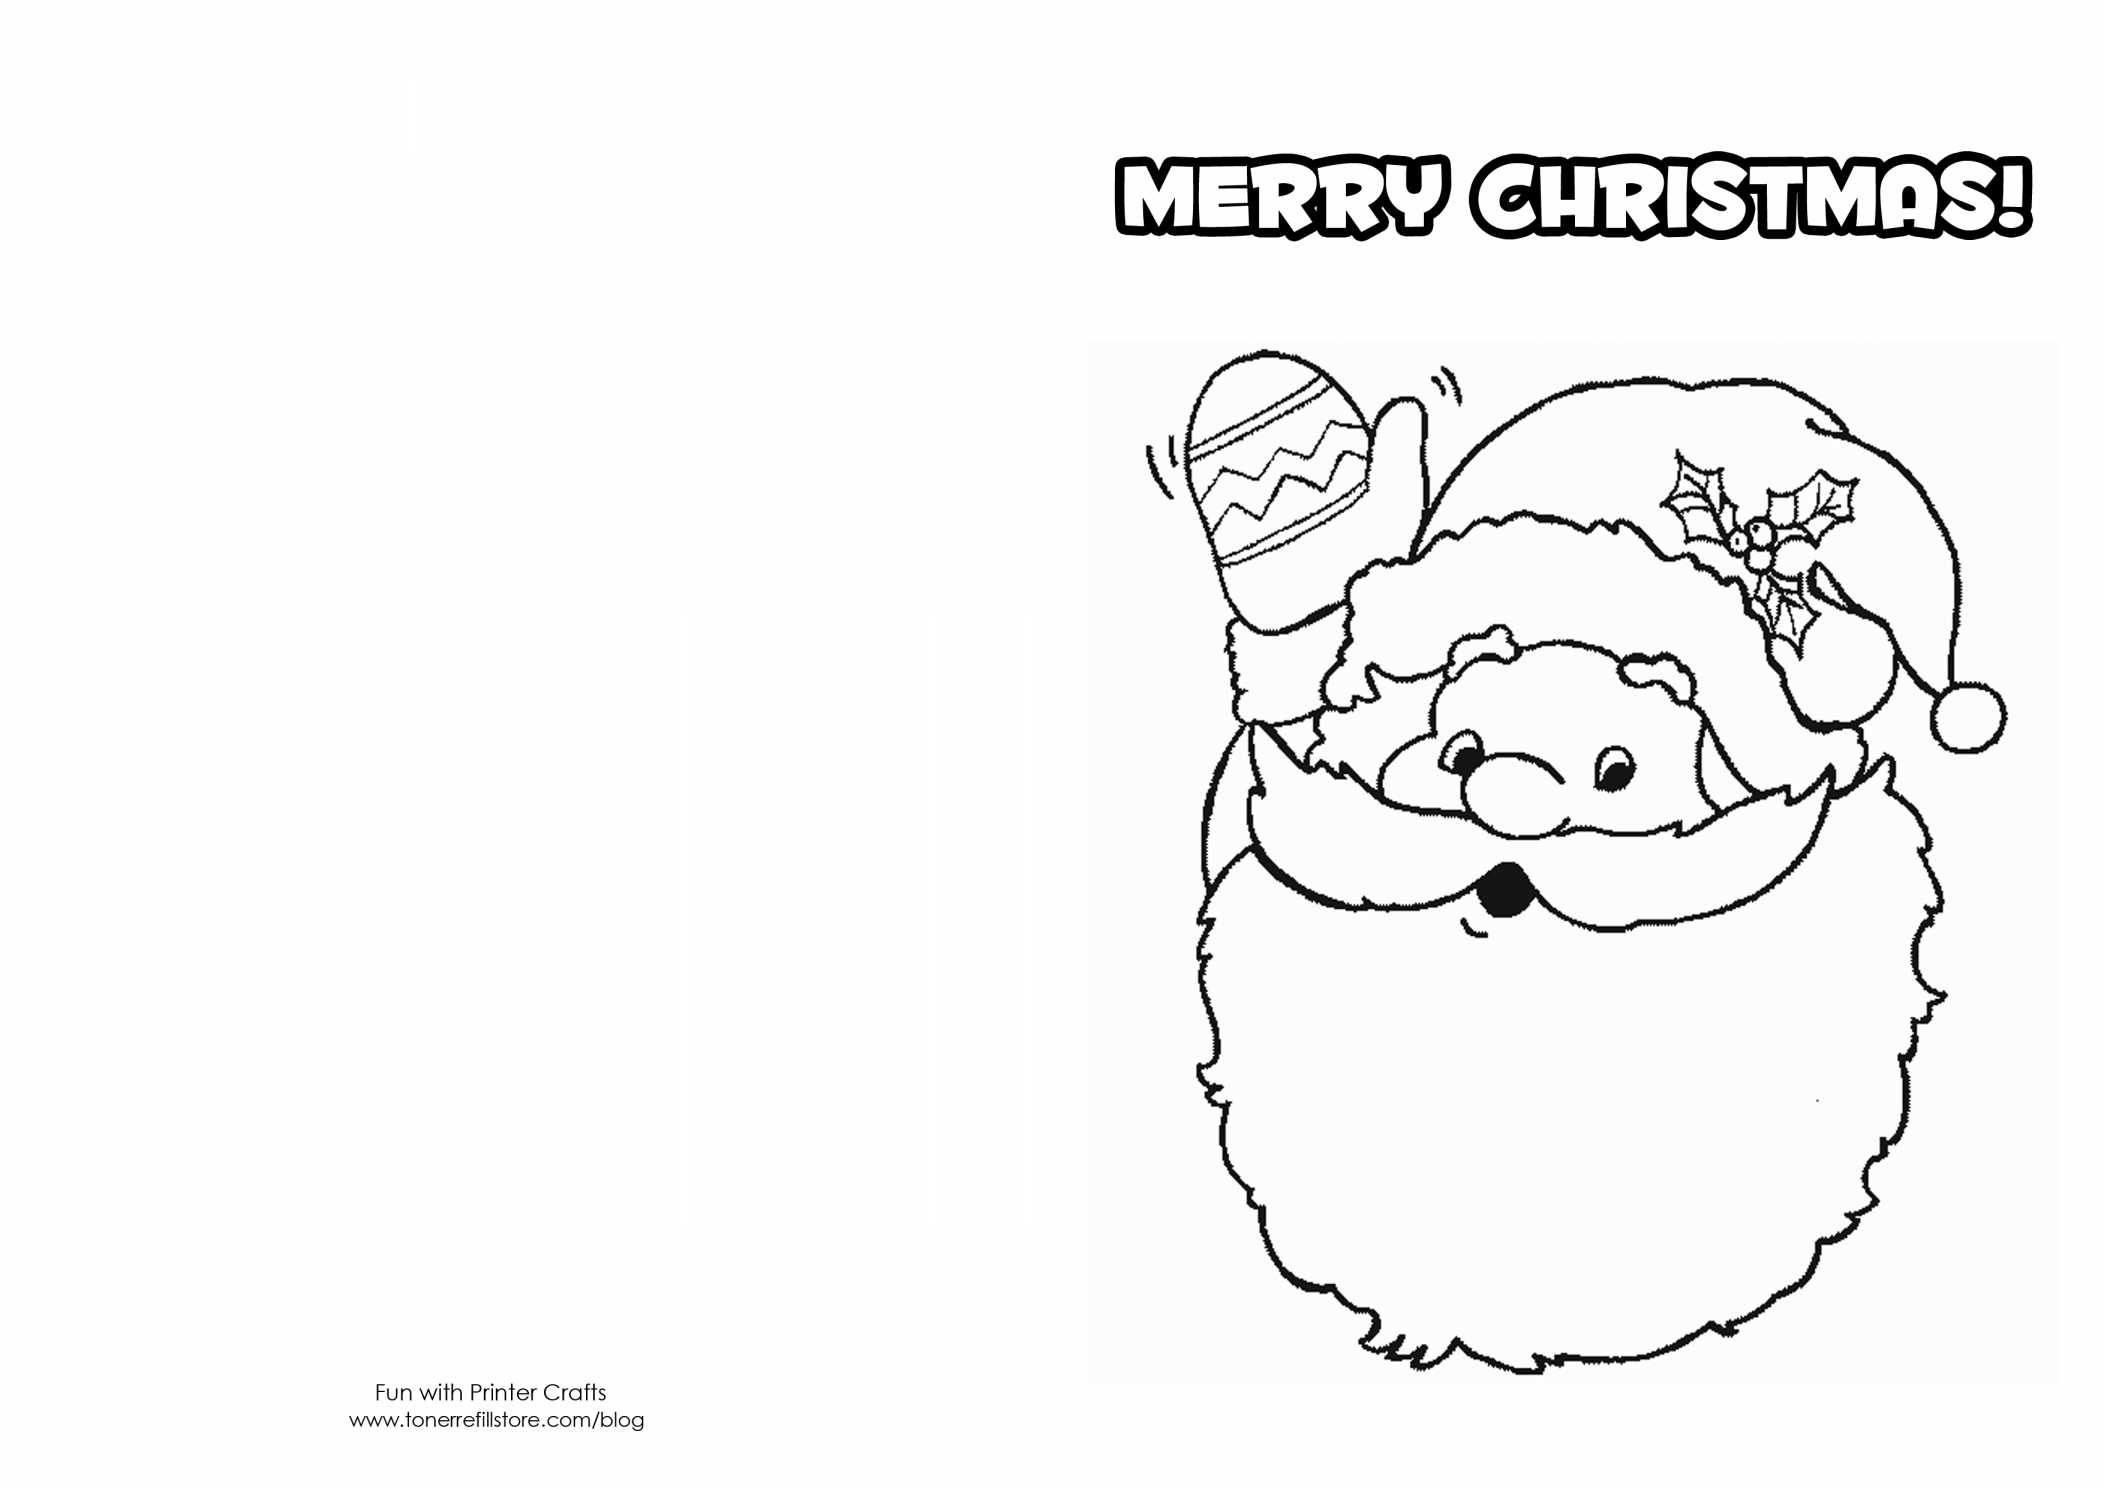 Christmas Card Coloring Pages For Free Download. Card Coloring Pages - Free Printable Christmas Cards To Color